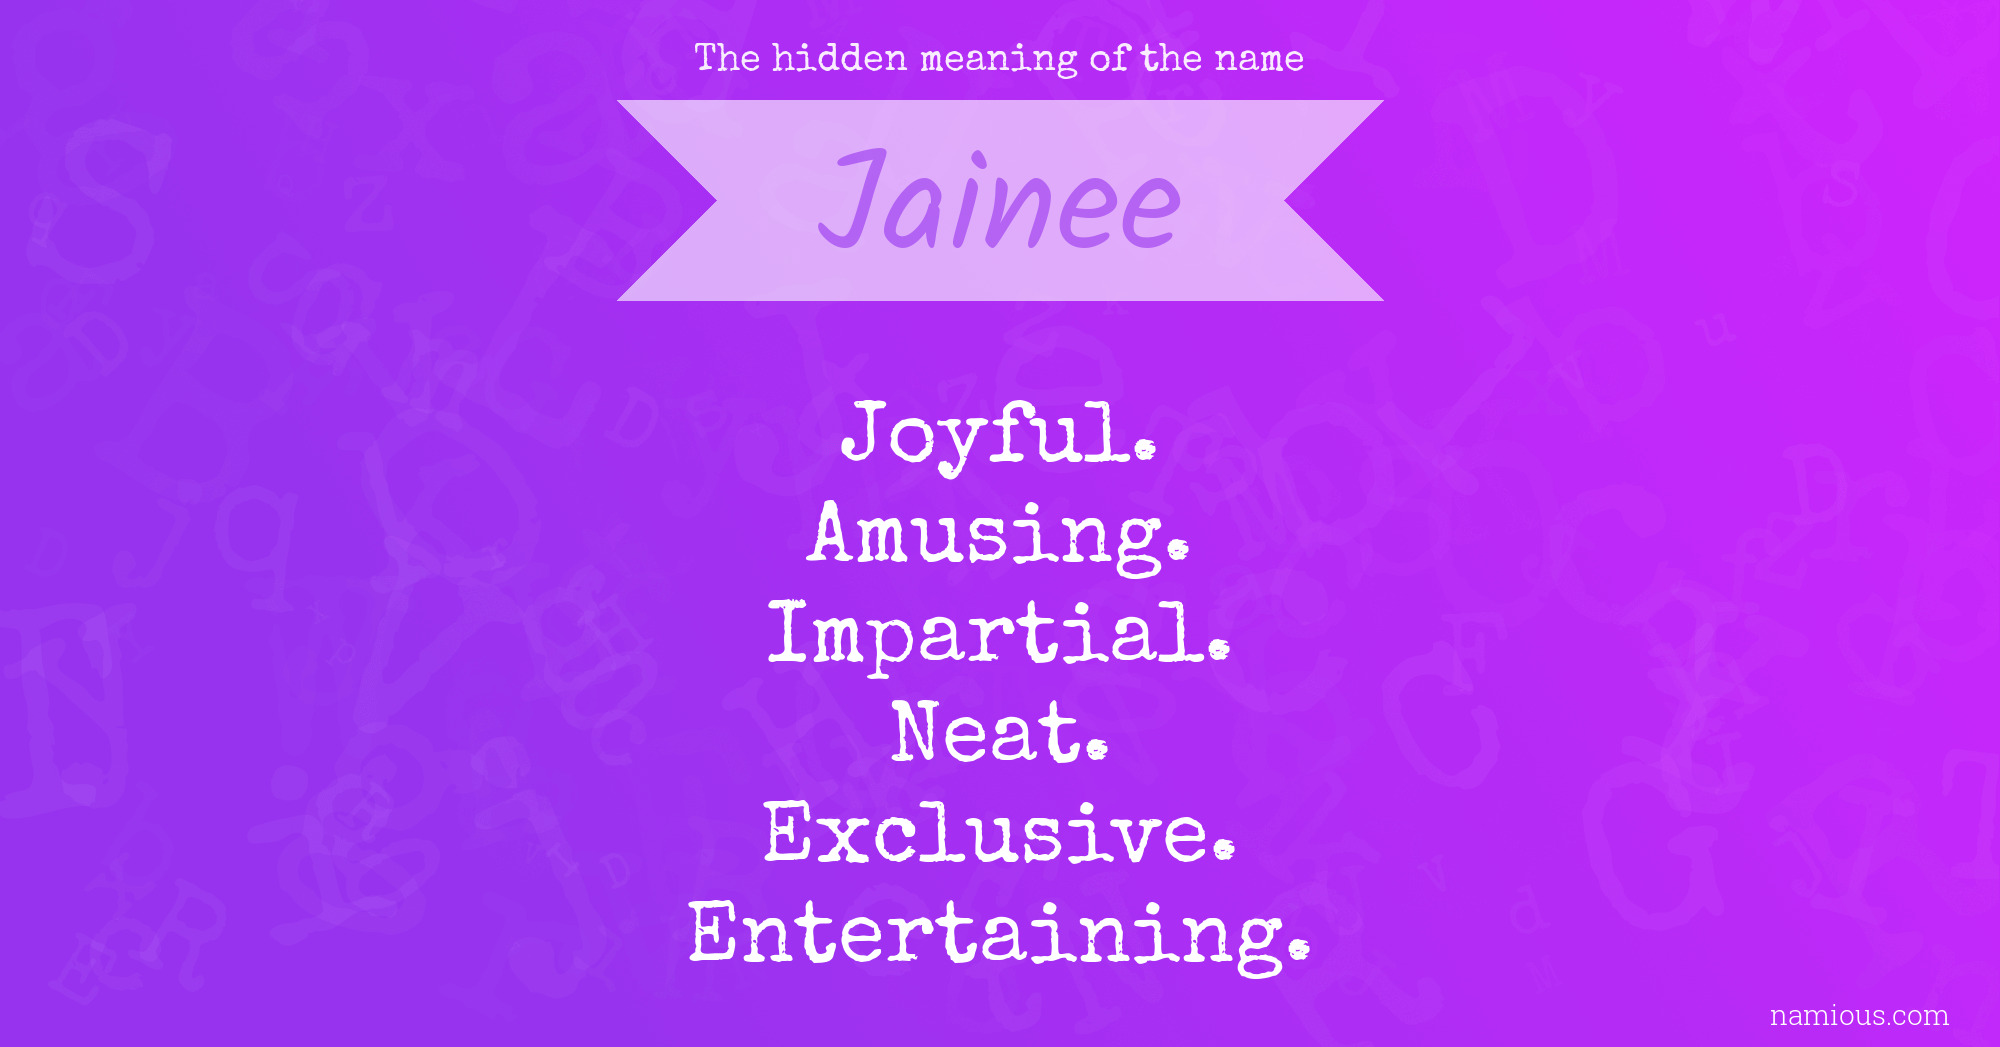 The hidden meaning of the name Jainee